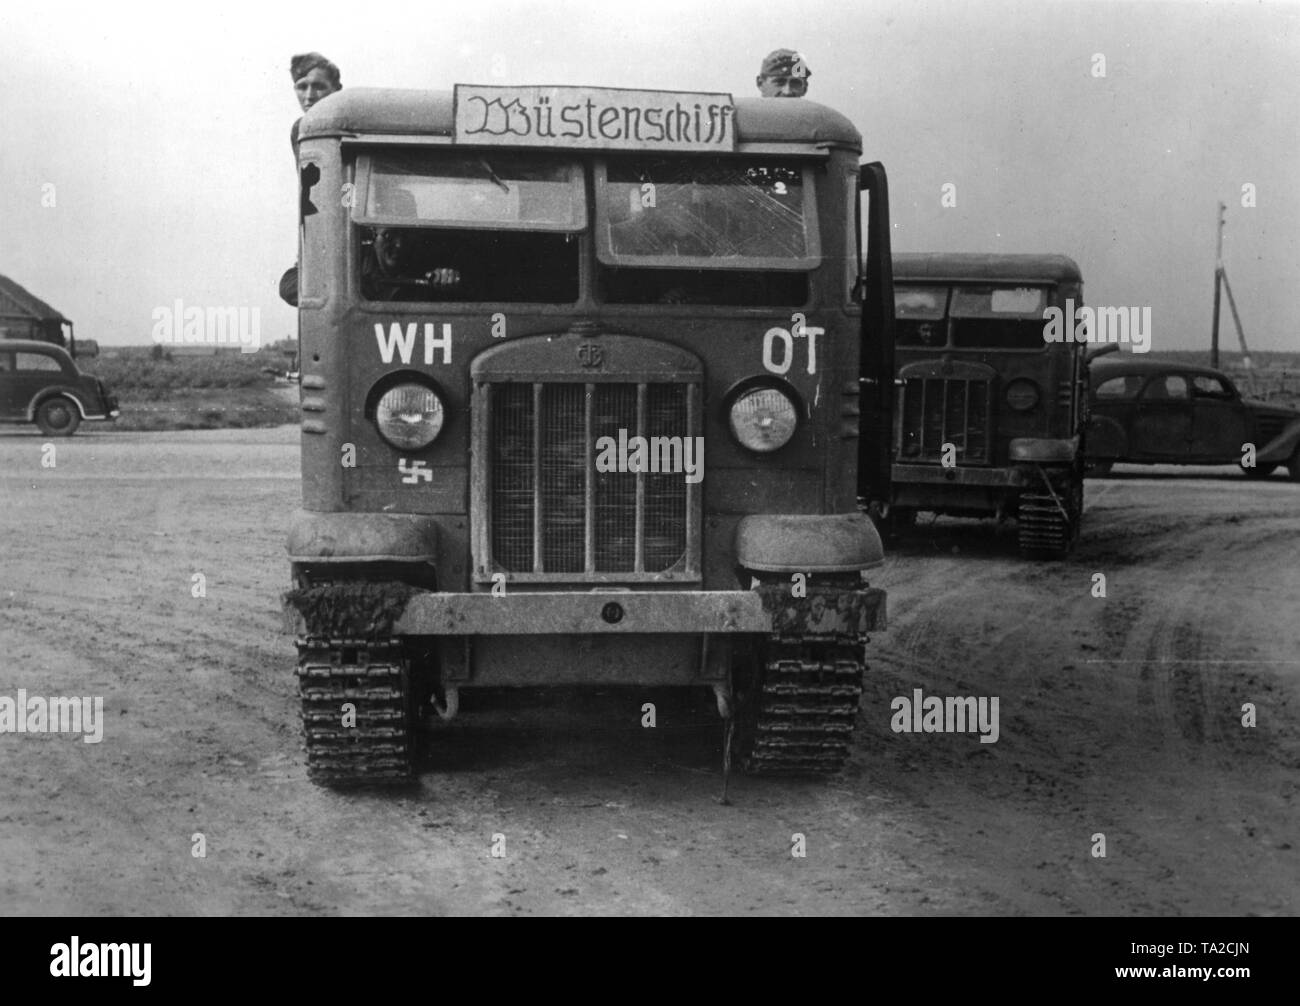 Trucks of the type Stalinec 3 (St 3) confiscated by the Germans from the artillery of the Soviet Army (on the front the lettering 'Wuestenschiff') for the Todt Organization, drive to the Eastern Front near Velikije Luki to repair the Soviet roads. War reporter: Friedrich. Stock Photo